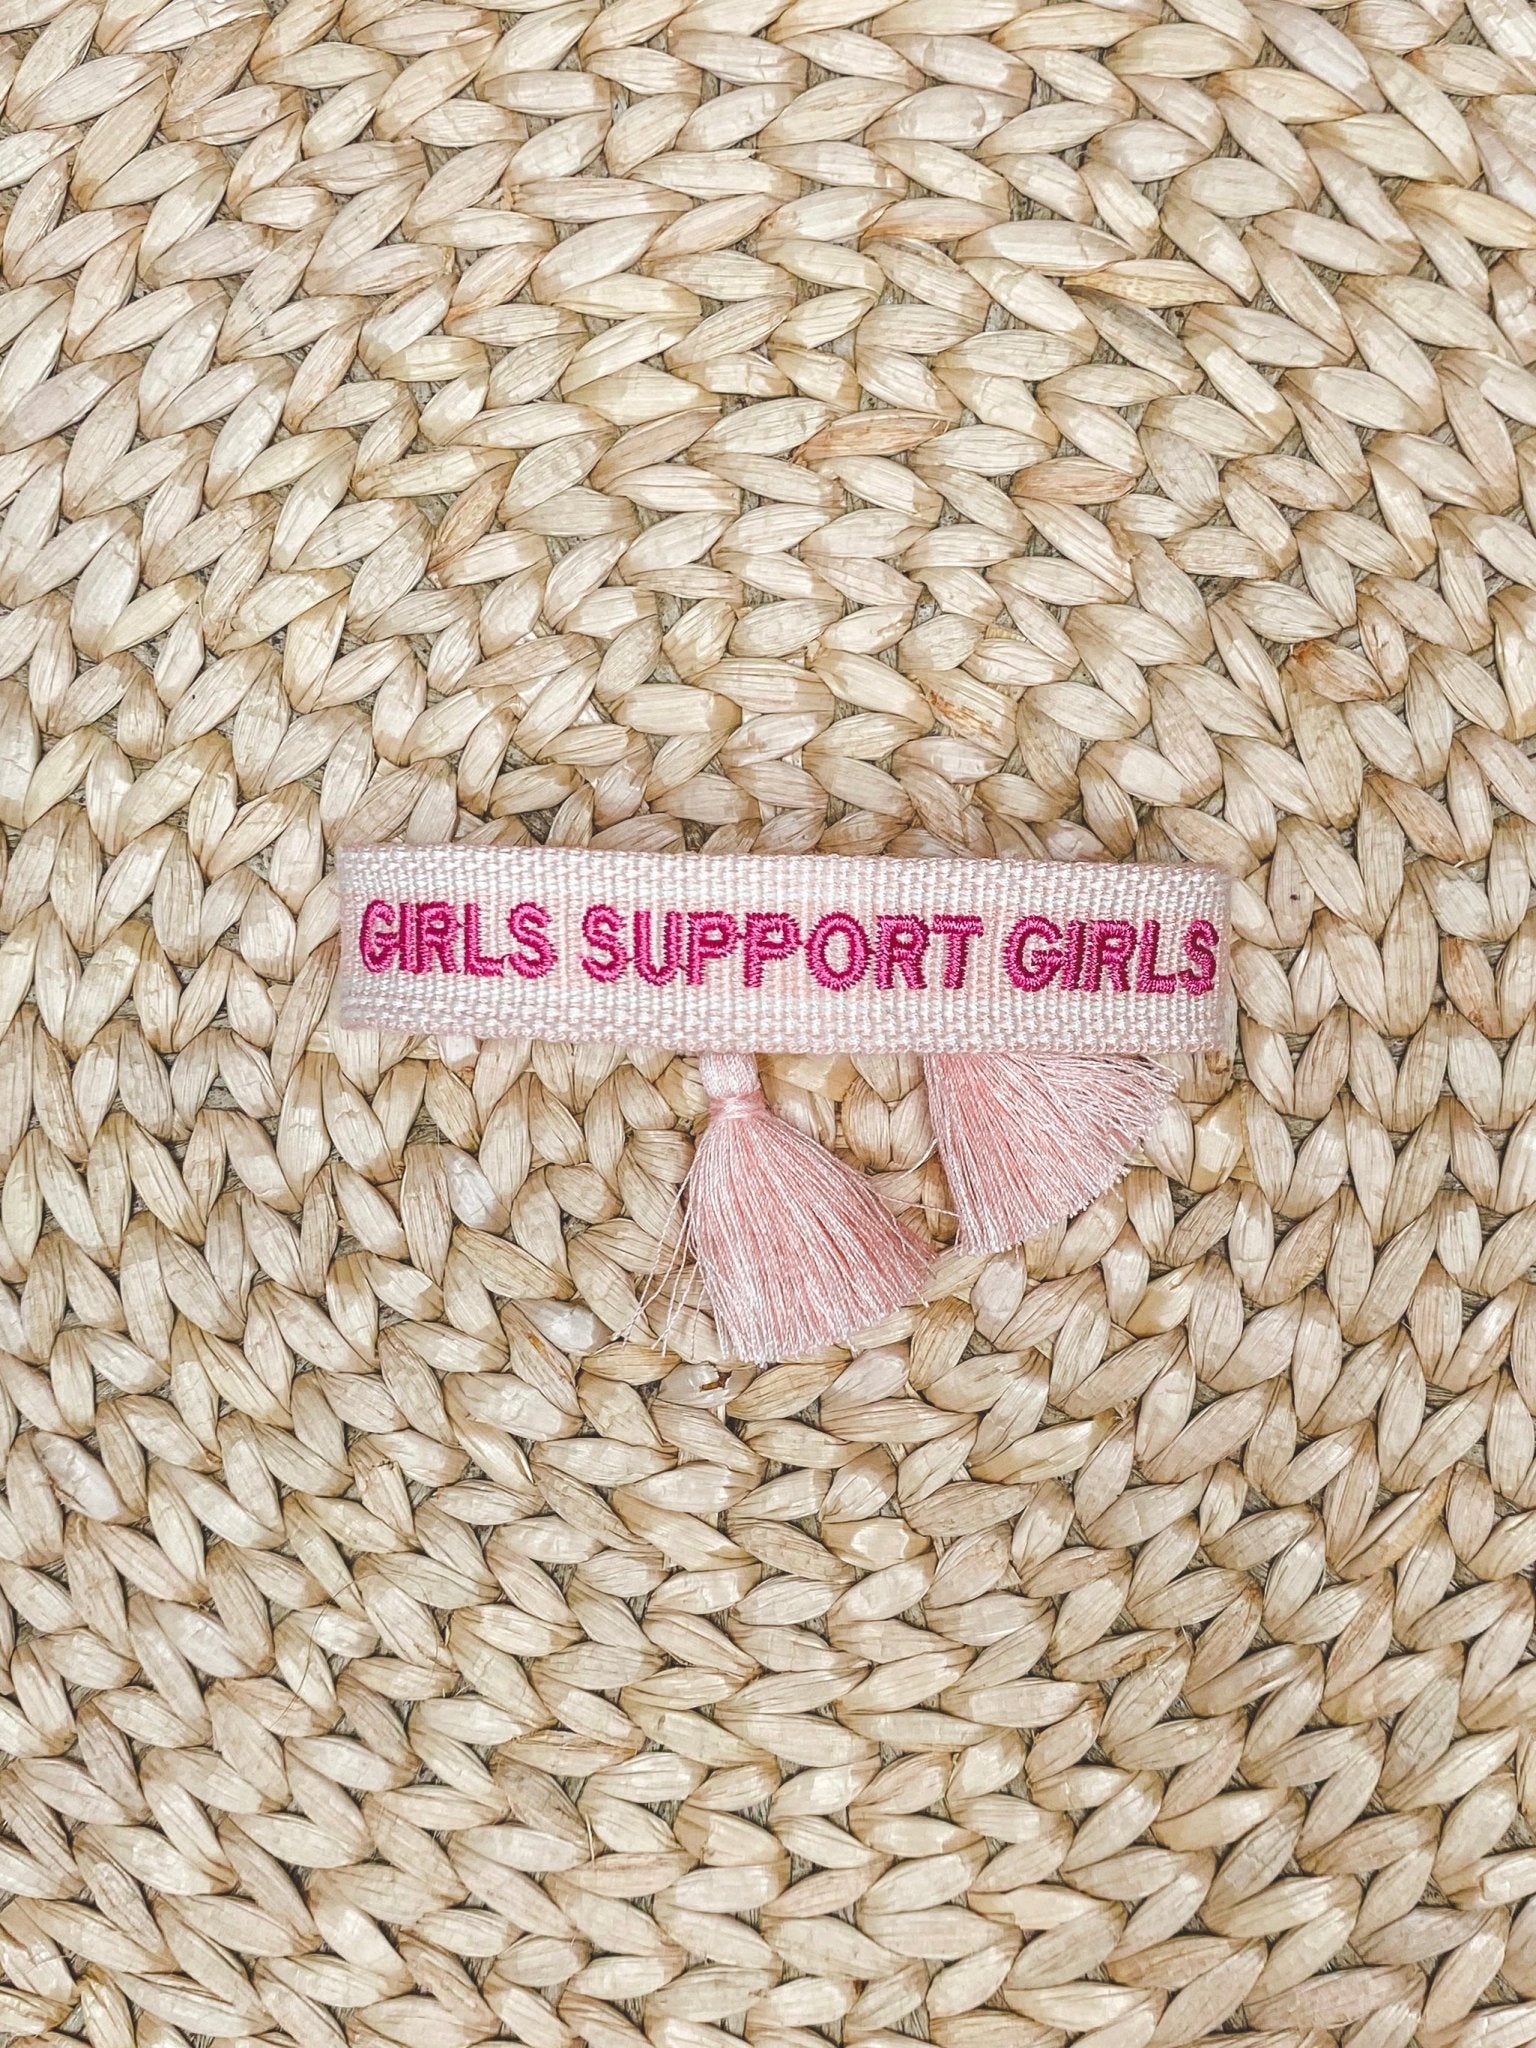 Girls support girls bracelet light pink - Stylish Bracelets - Affordable Jewelry and Belts at Lush Fashion Lounge Boutique in Oklahoma City